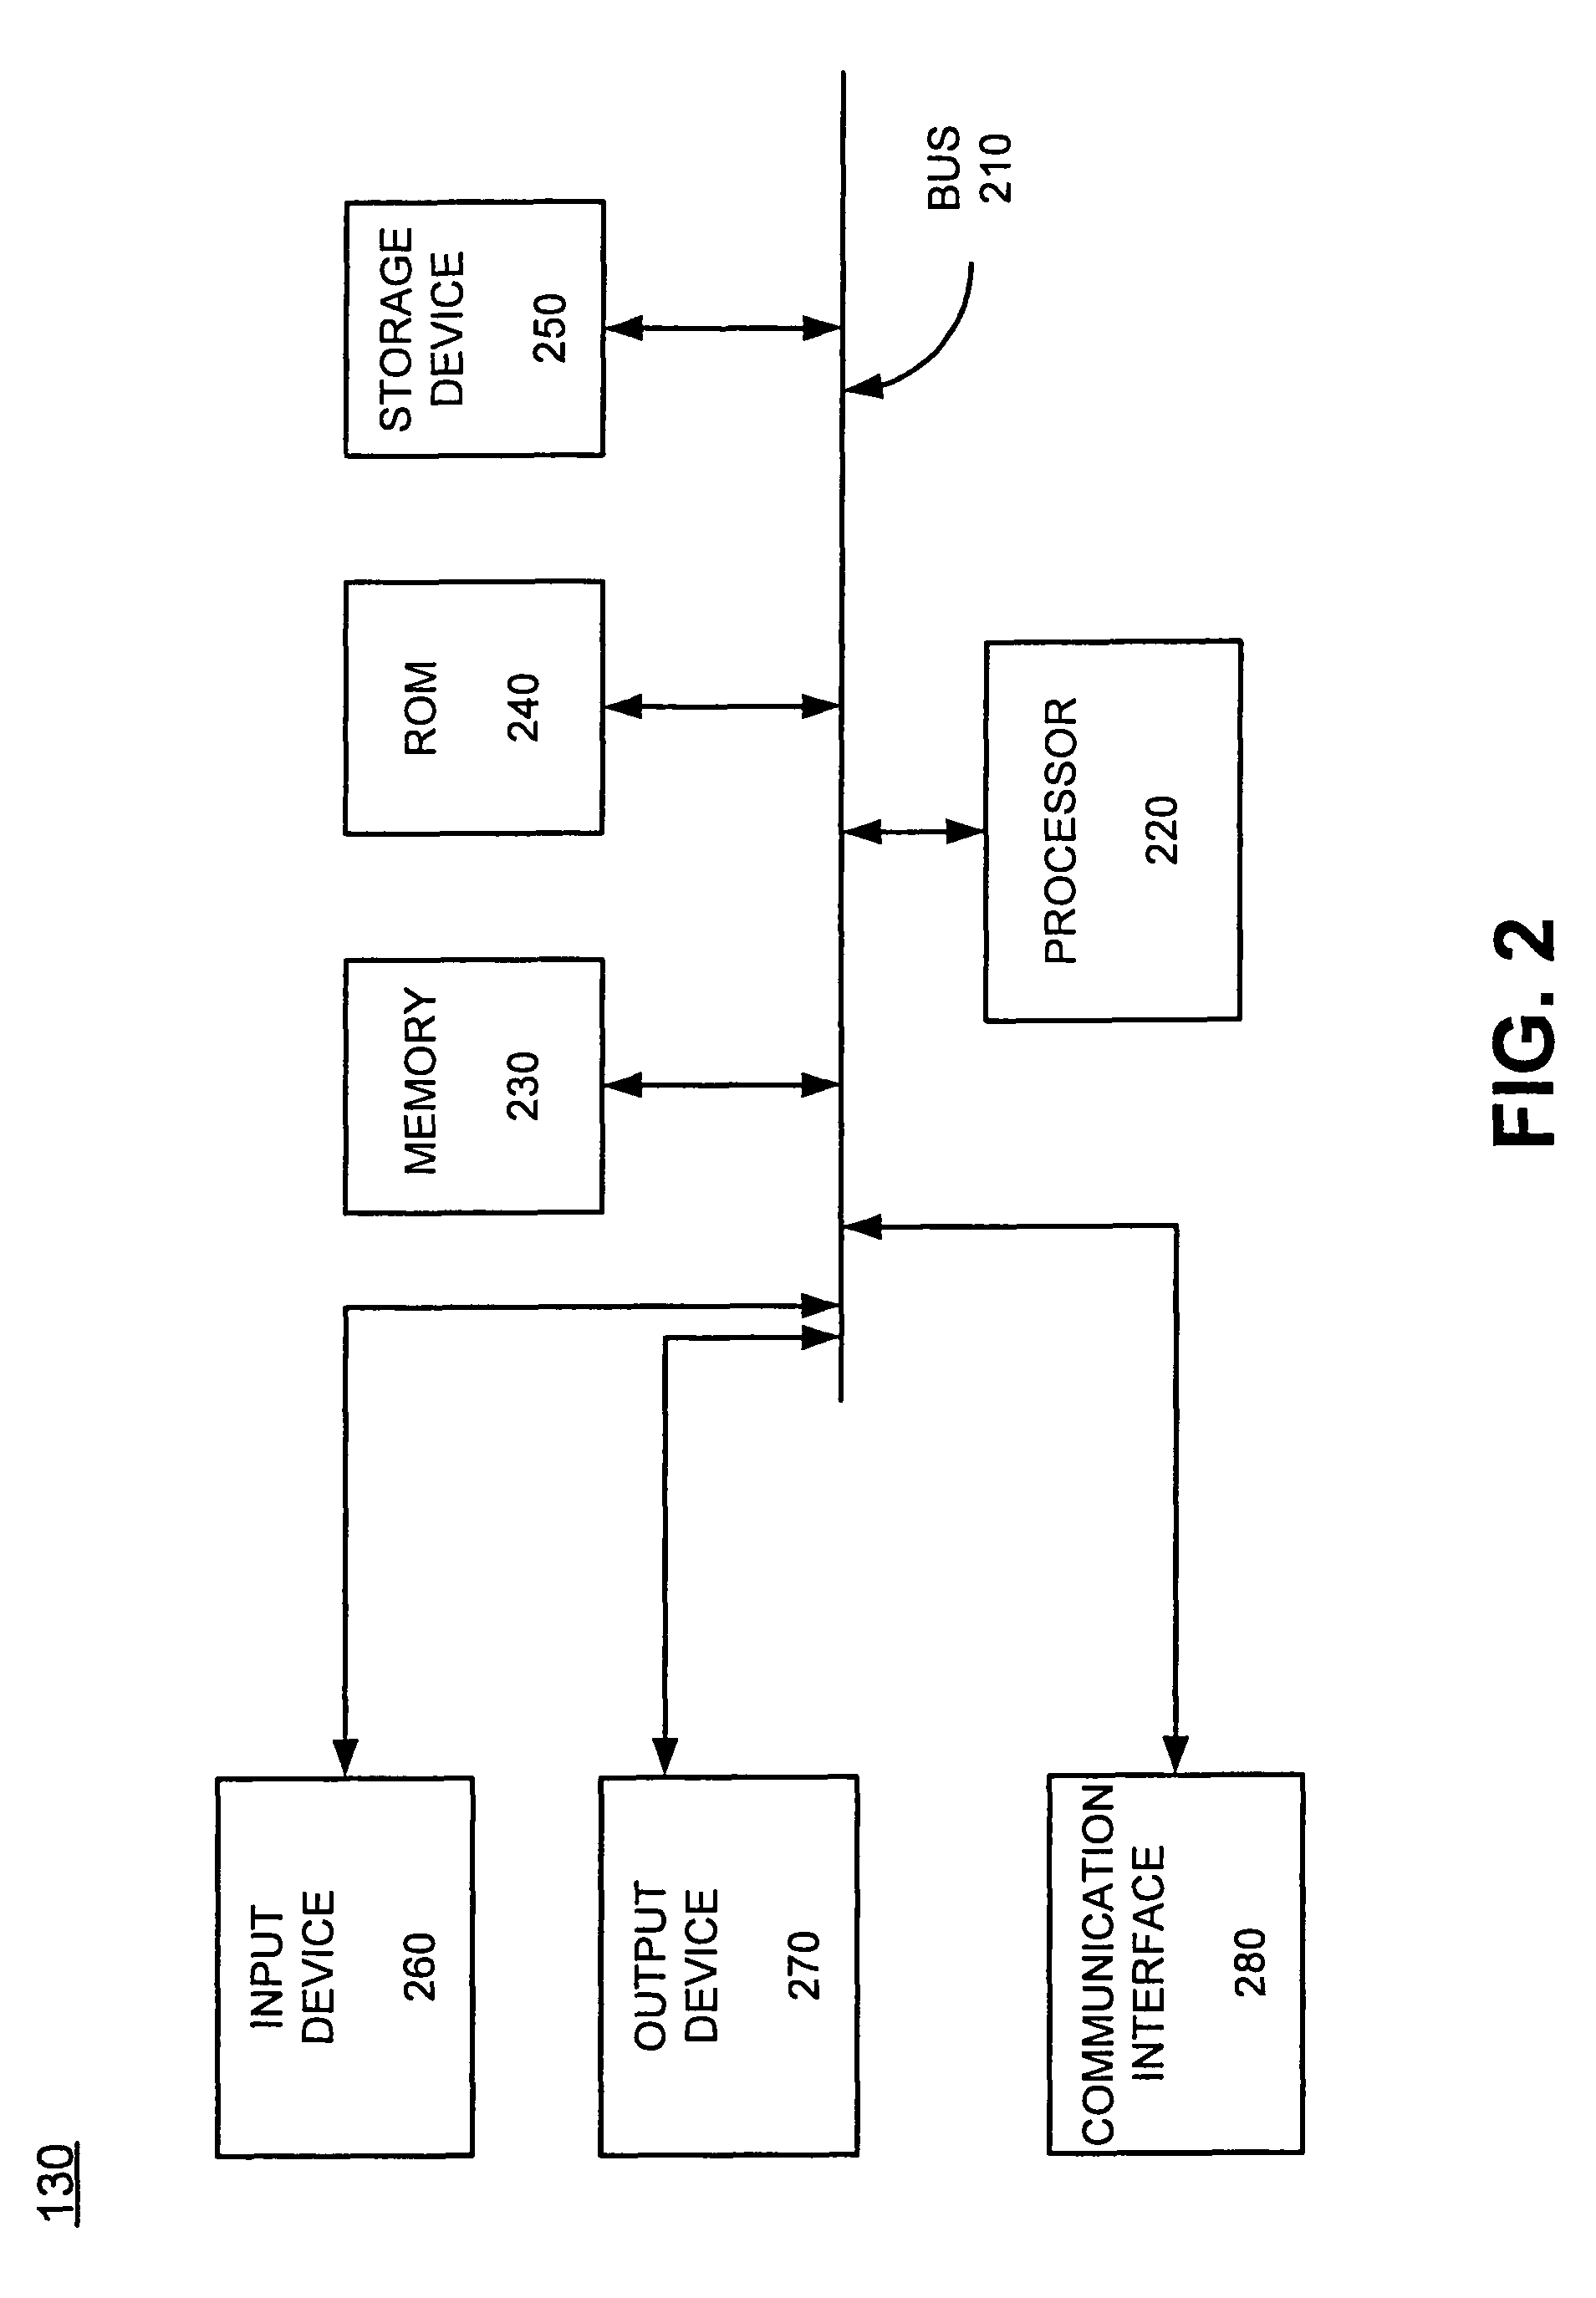 Systems and methods for gathering information